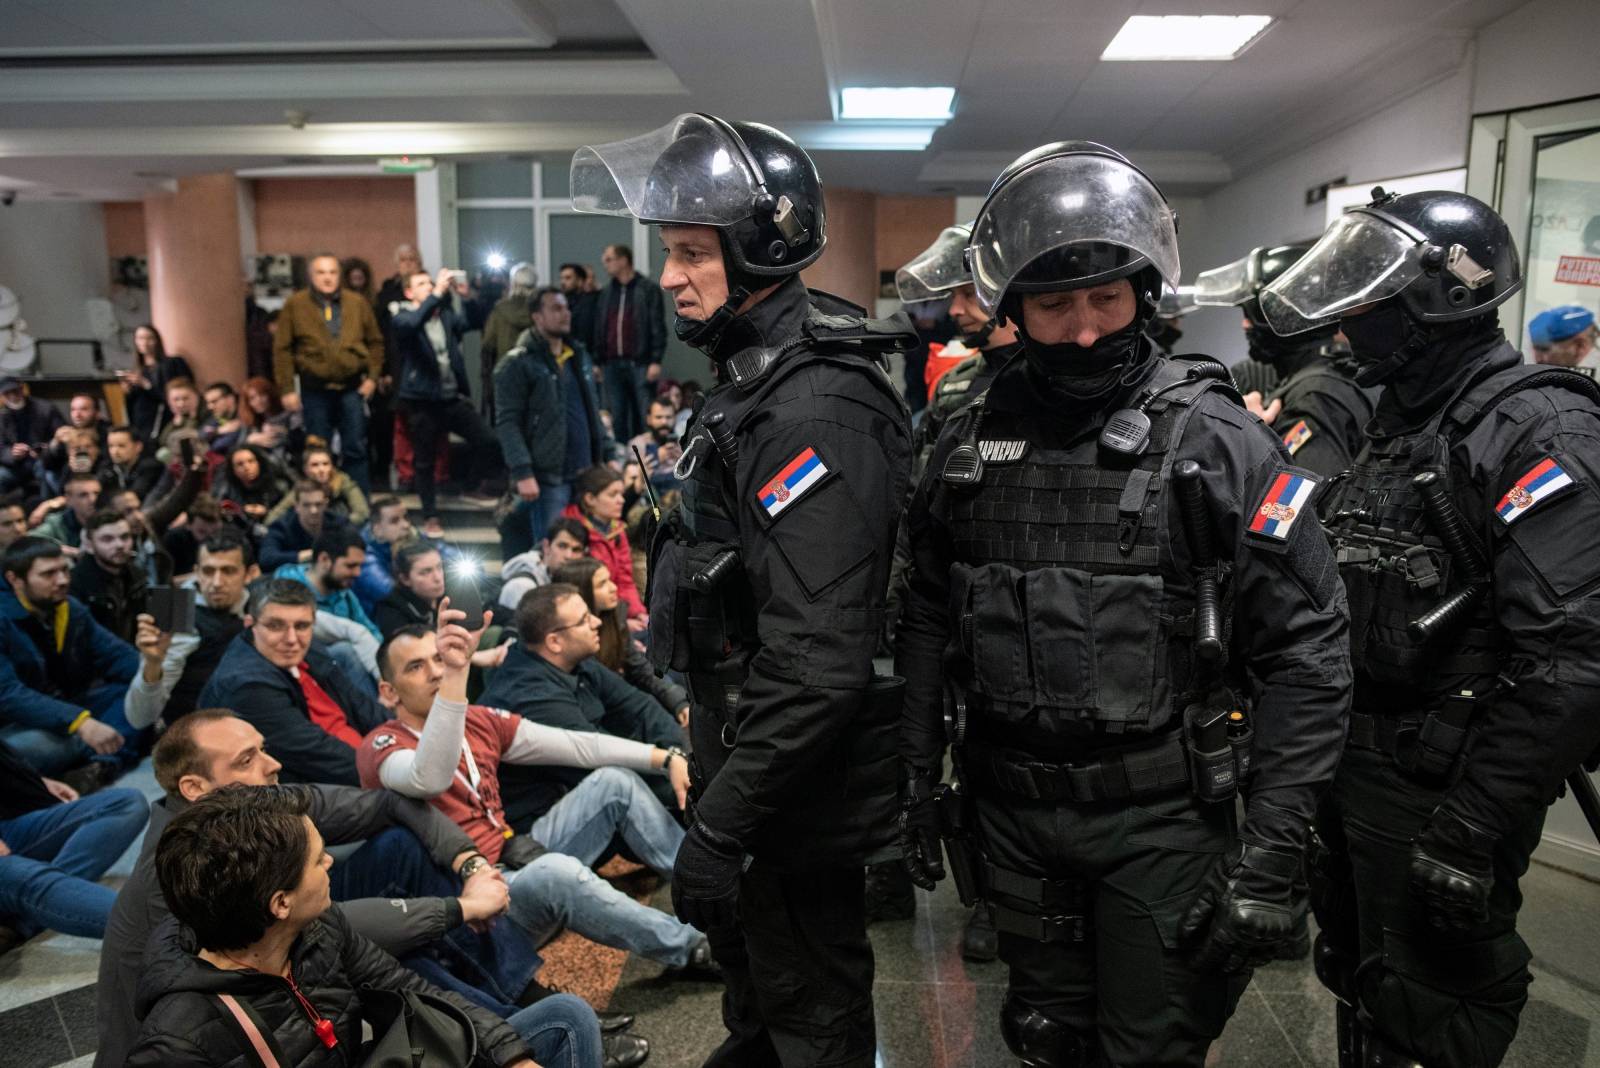 Protesters briefly broke into Serbia's state television building during a protest against Serbian President Aleksandar Vucic and his government in central Belgrade